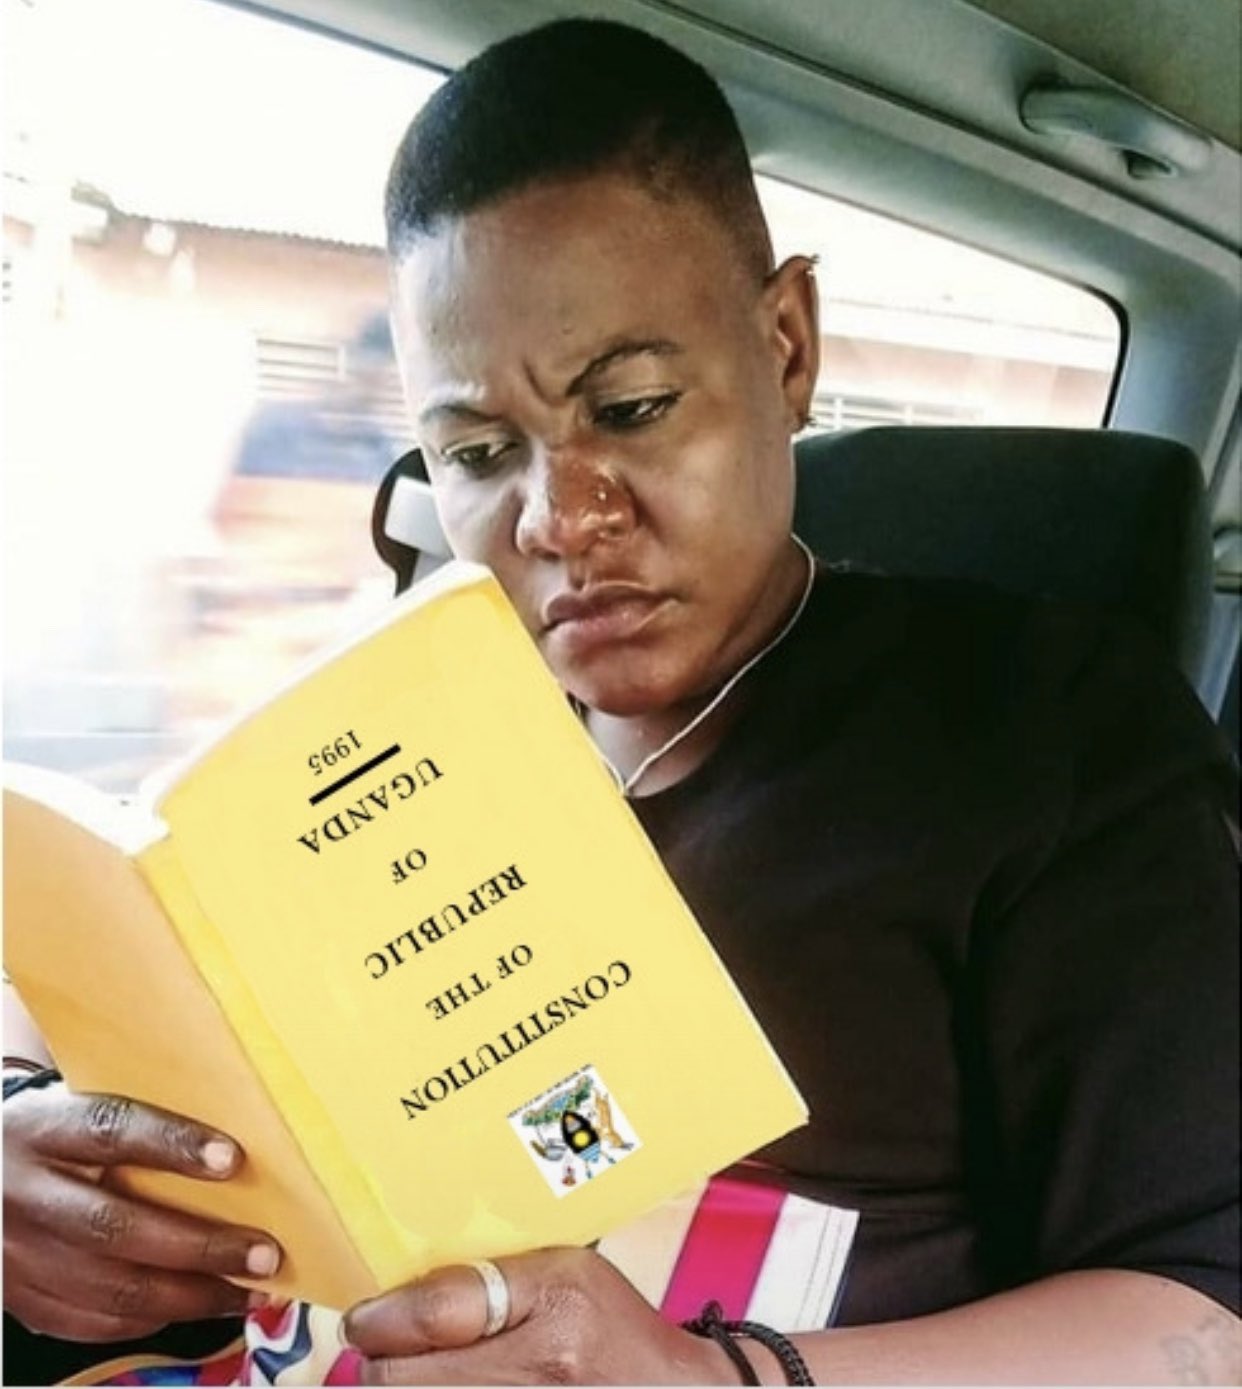 reddit dating - person reading a book upside down - Constitution Of The Republic Of Uganda 1995